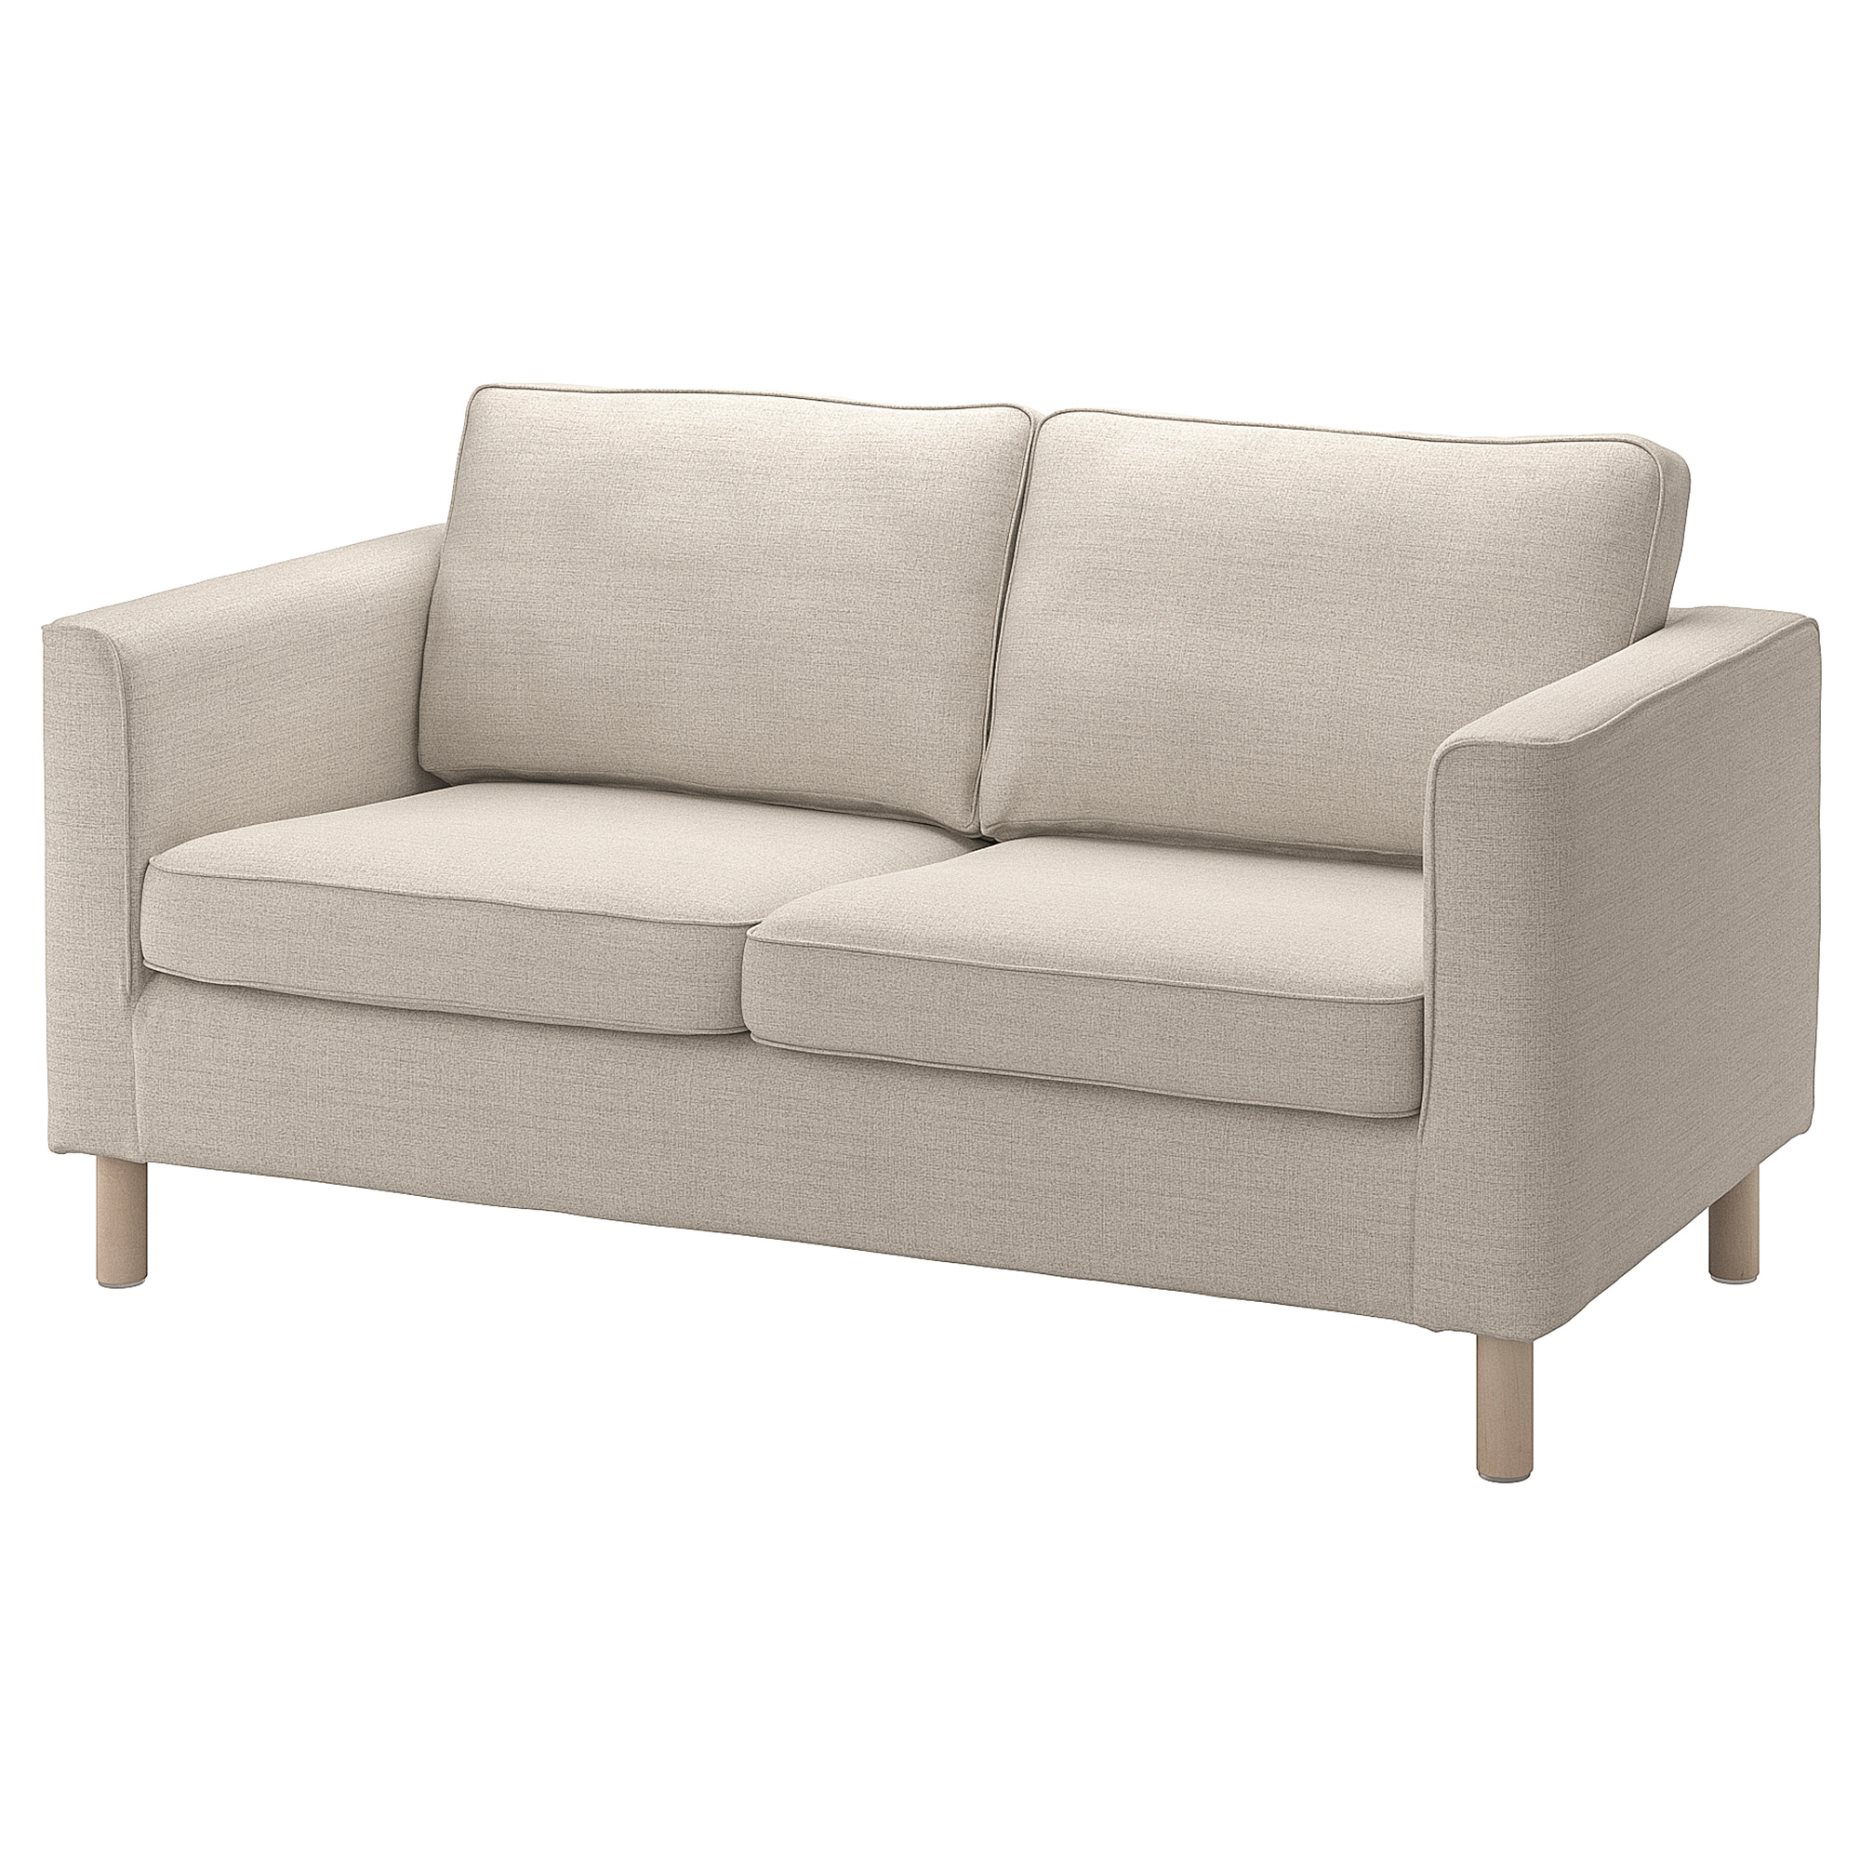 PÄRUP, cover for 2-seat sofa, 104.937.99